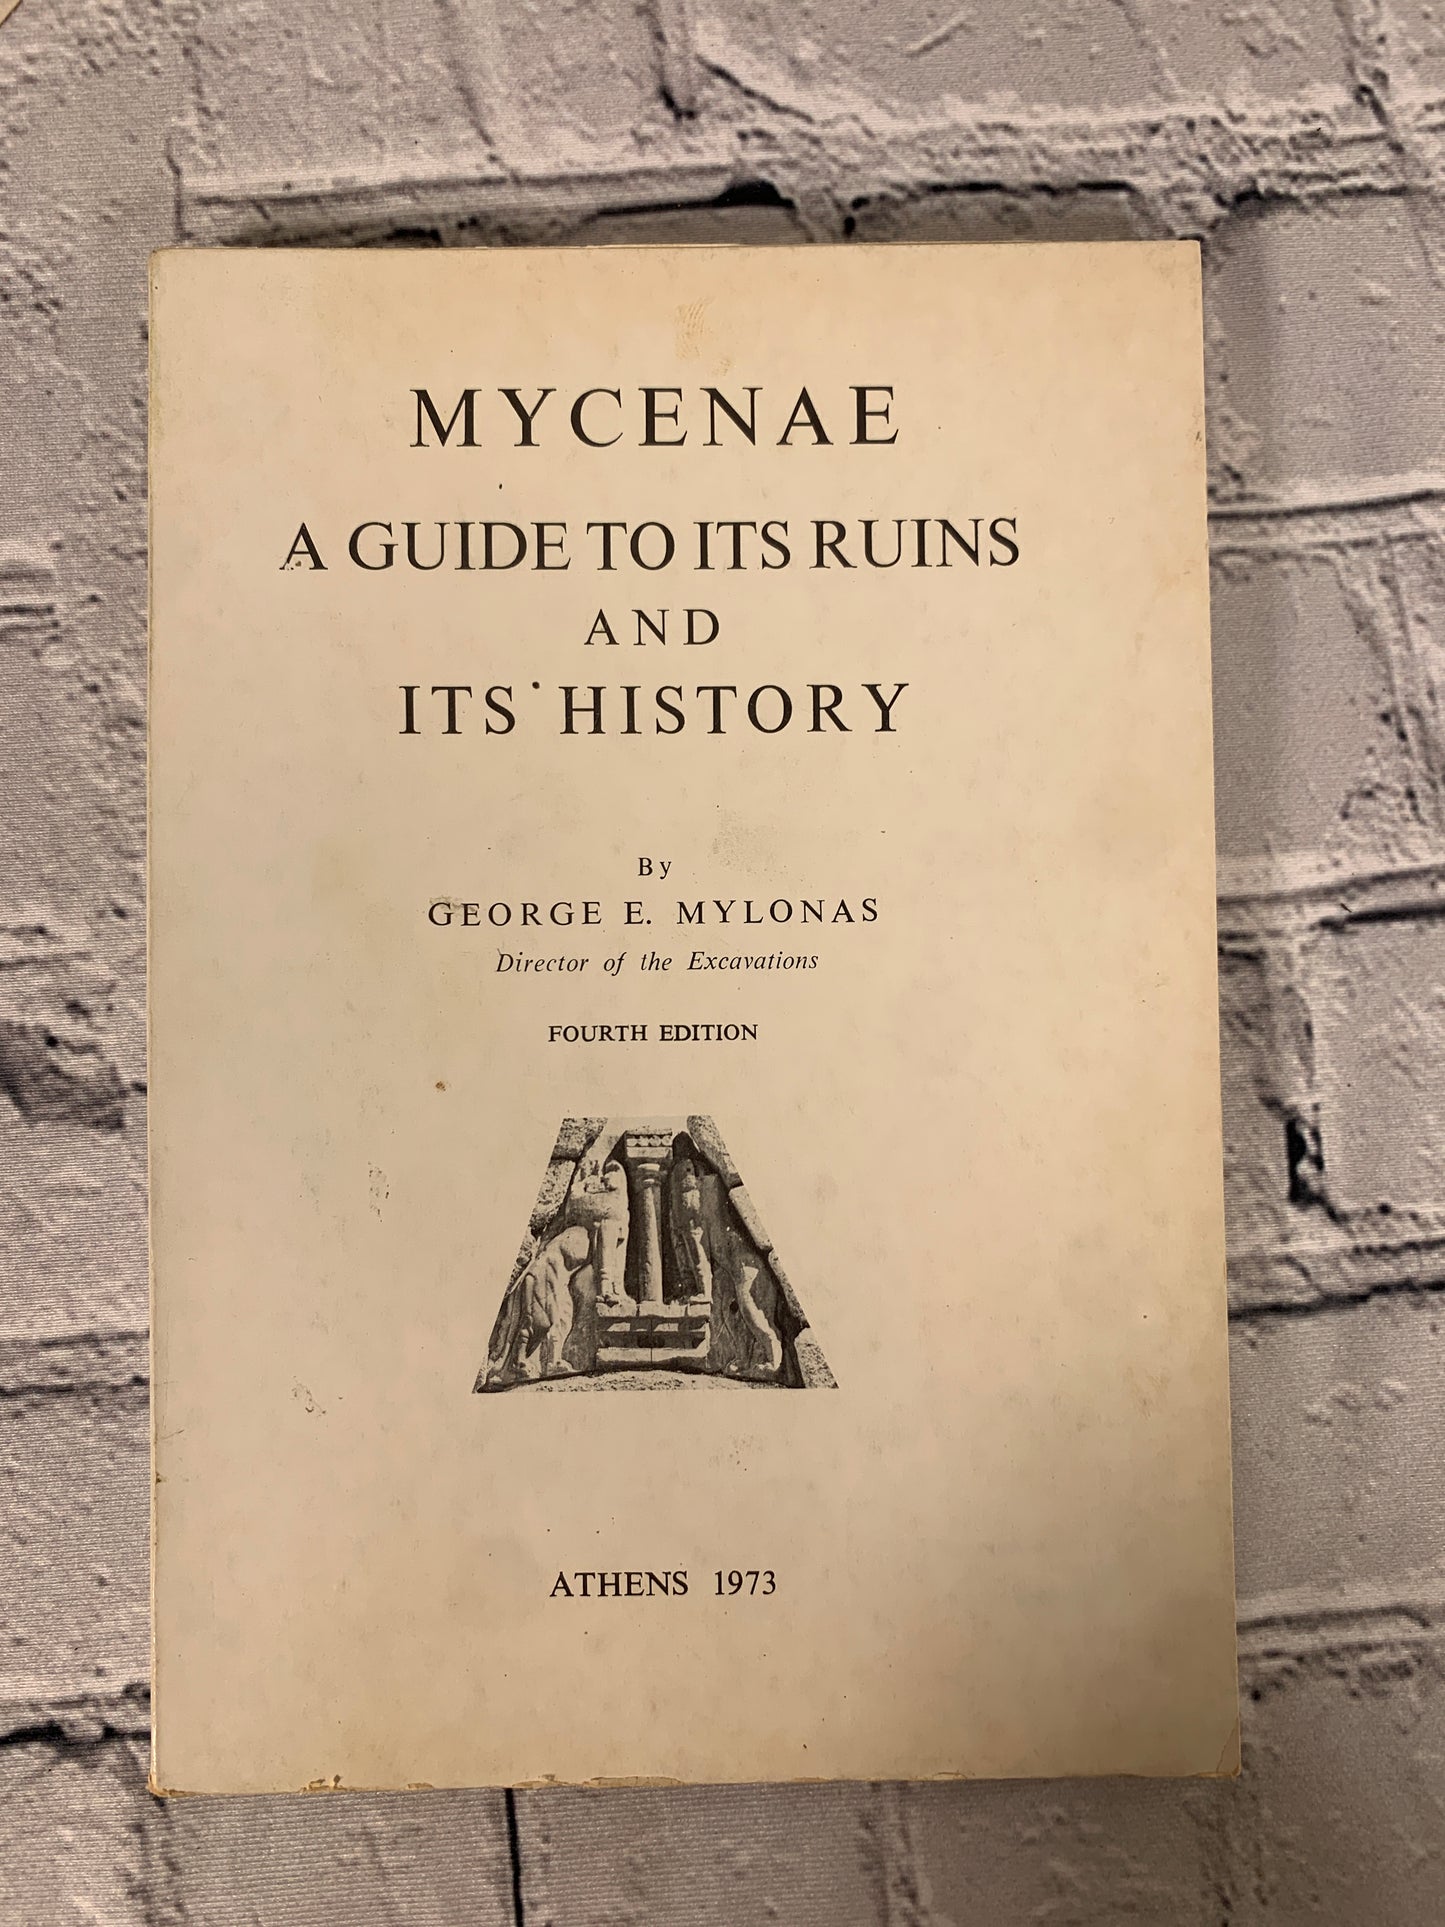 Mycenae: A Guide to its Ruins and Its History by George E. Mylonas [1973]